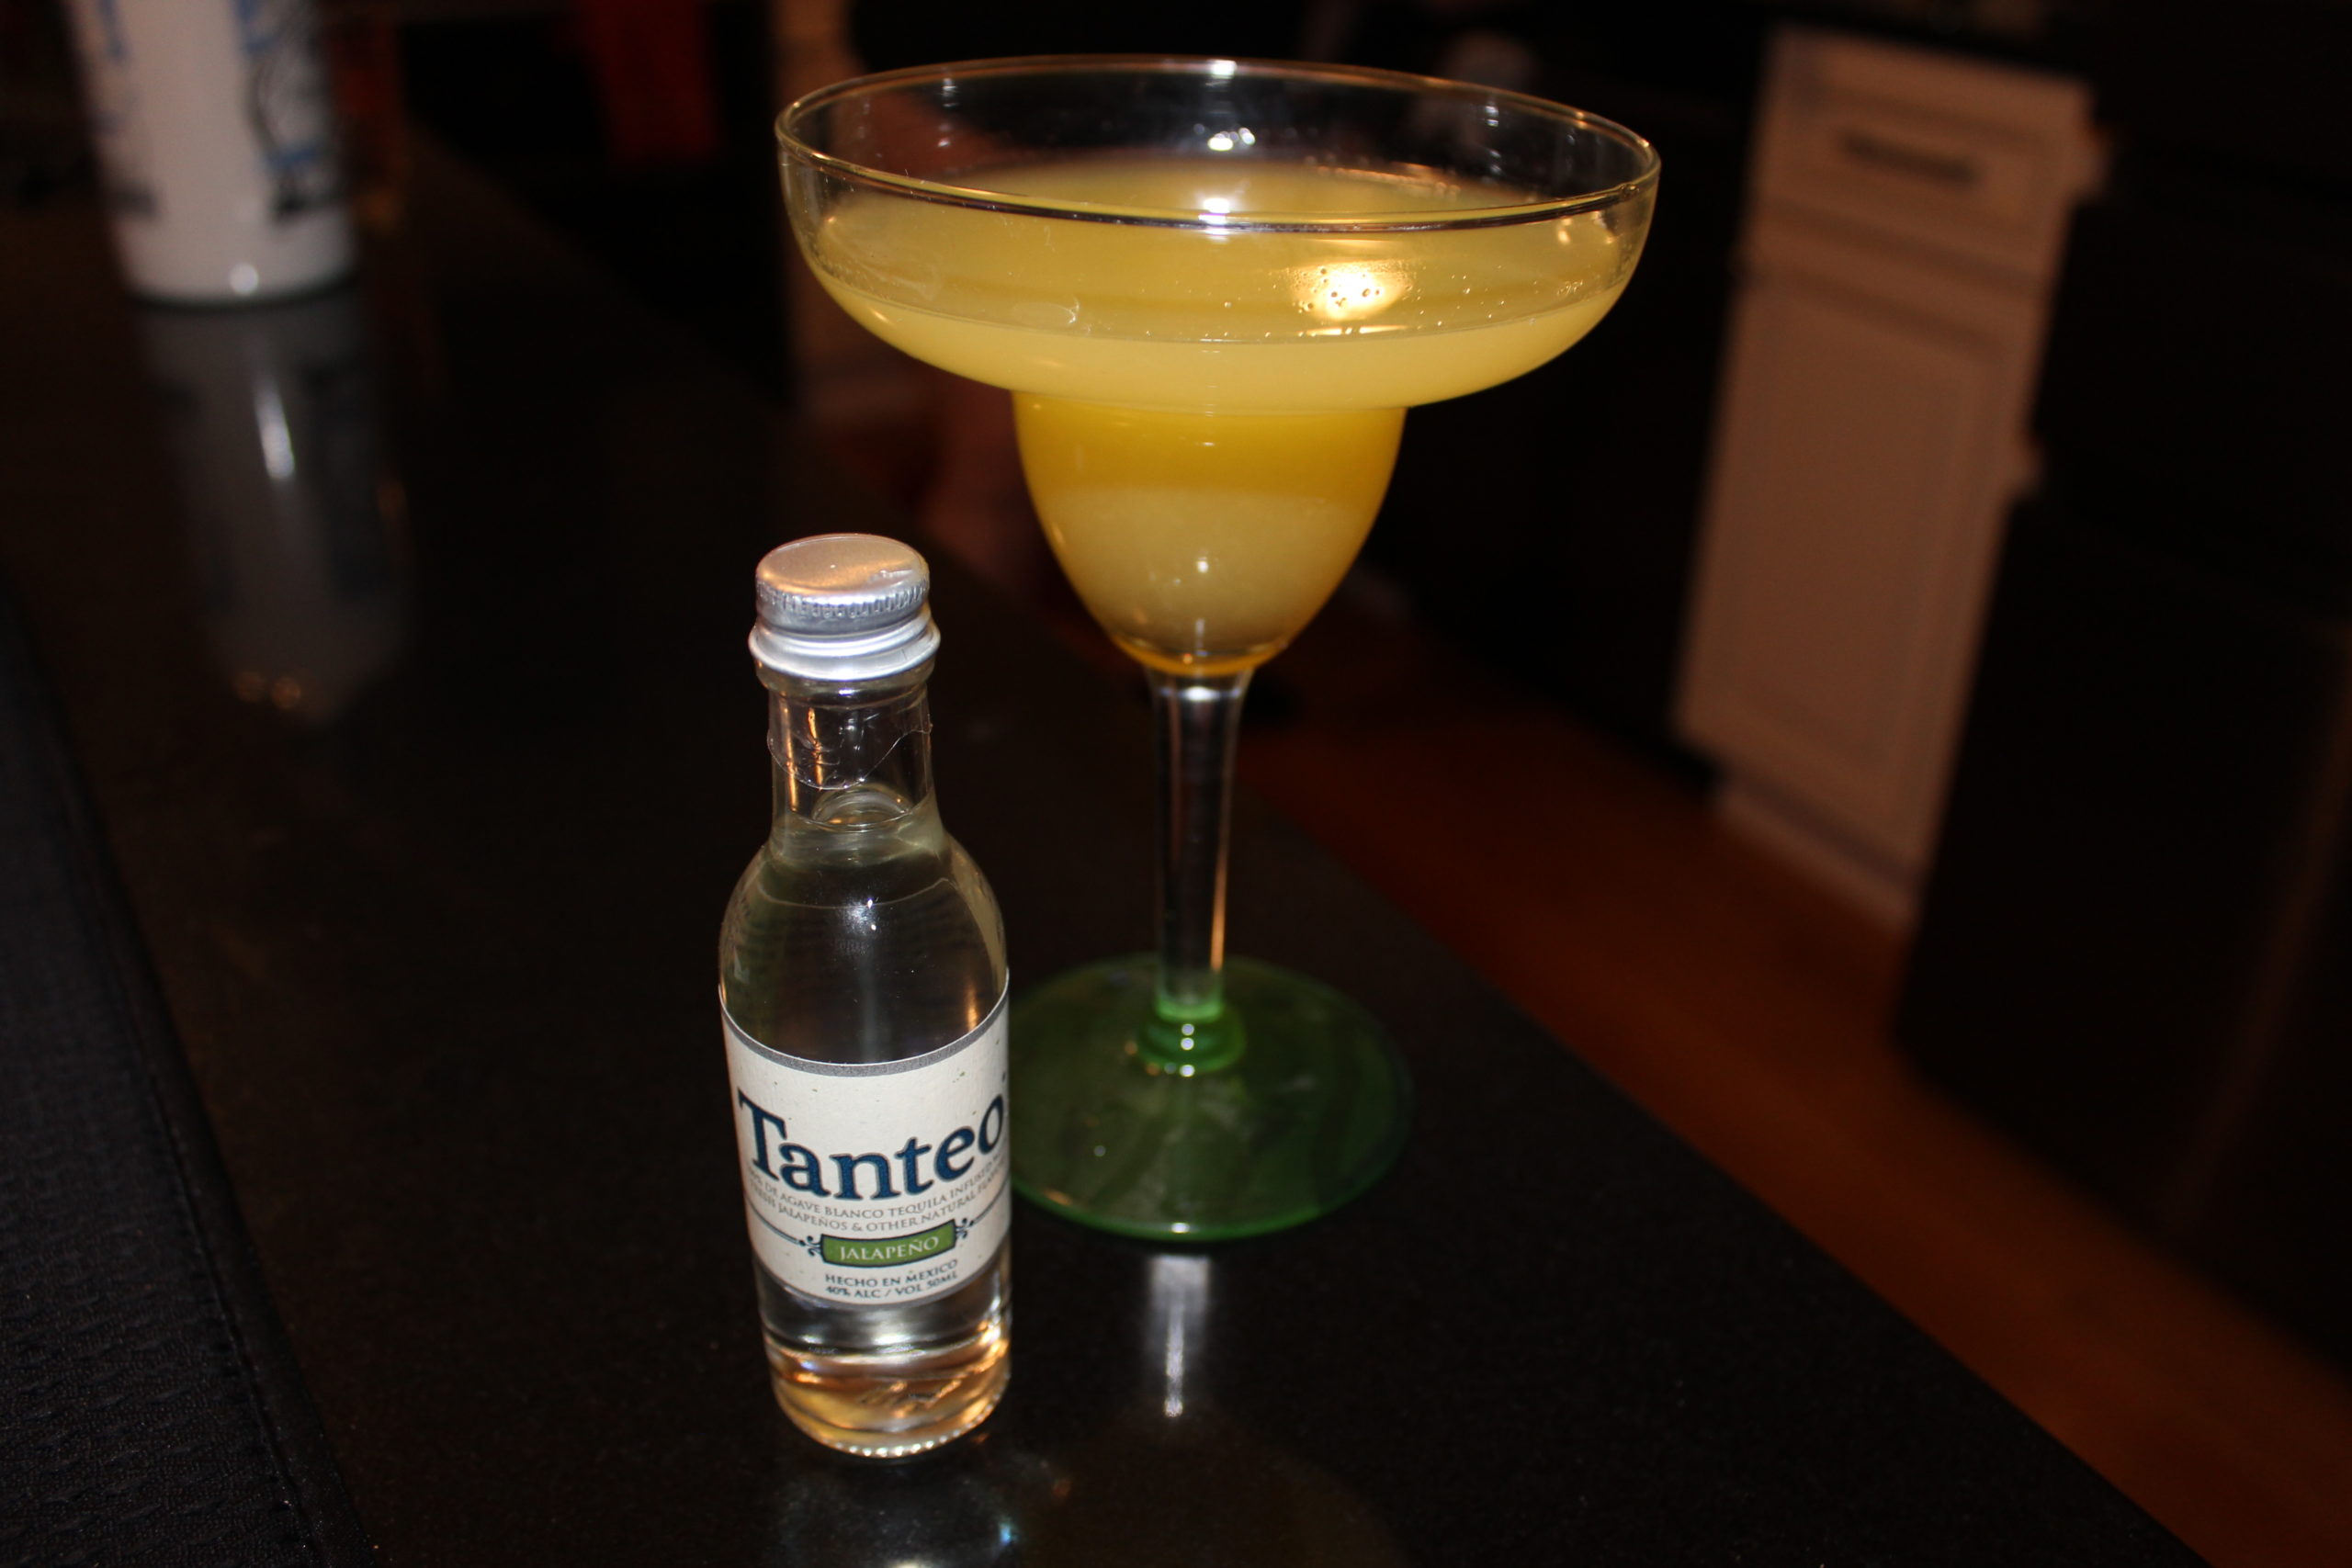 Tanteo Tequila Sizzling Citrus Marg